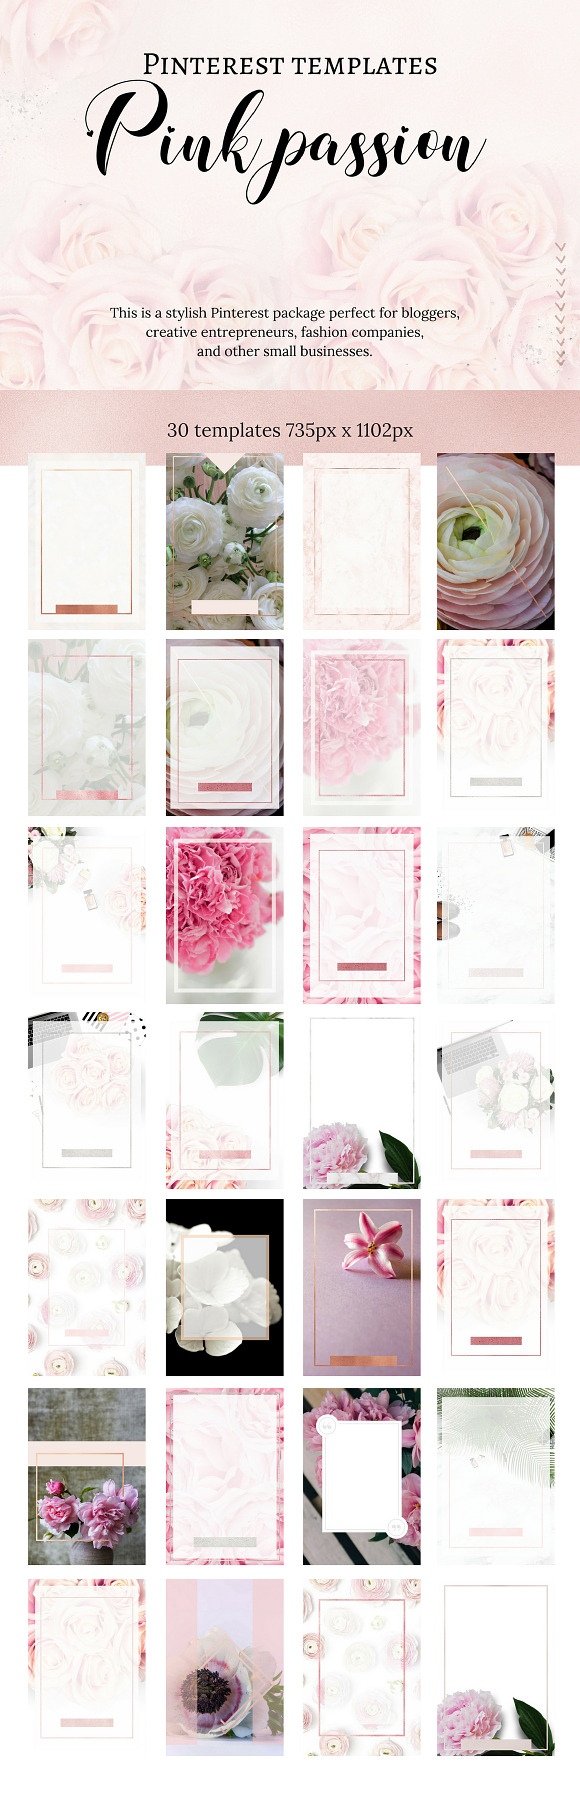 Pinterest templates- Pink passion in Pinterest Templates - product preview 1